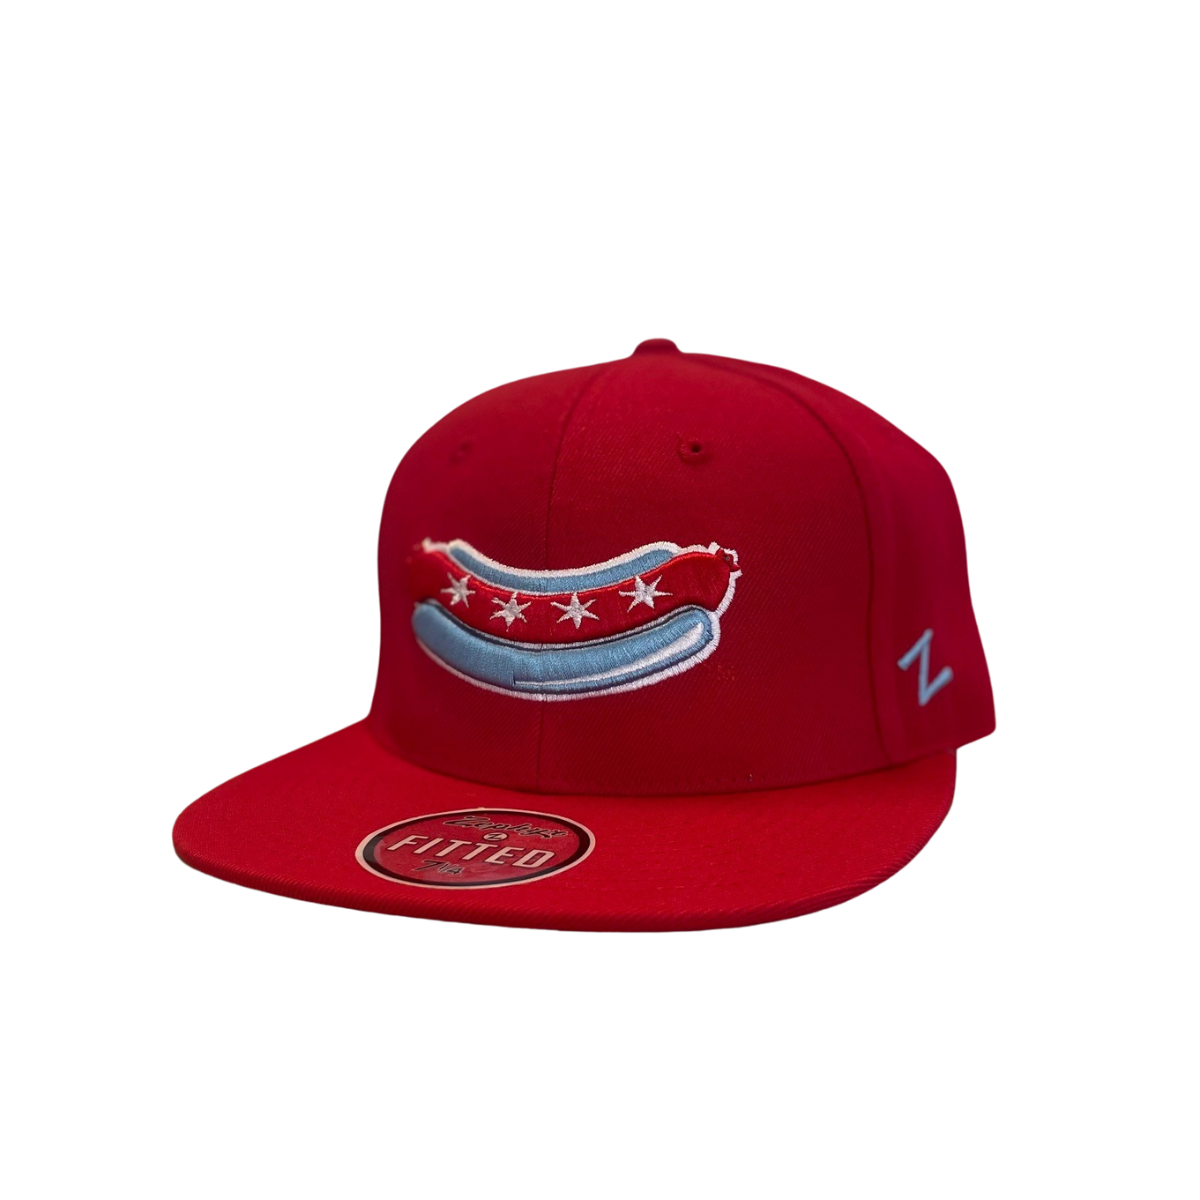 CHICAGO DOGS HAT FITTED HOME RED by ZEPHYR – Chicago Dogs Team Store